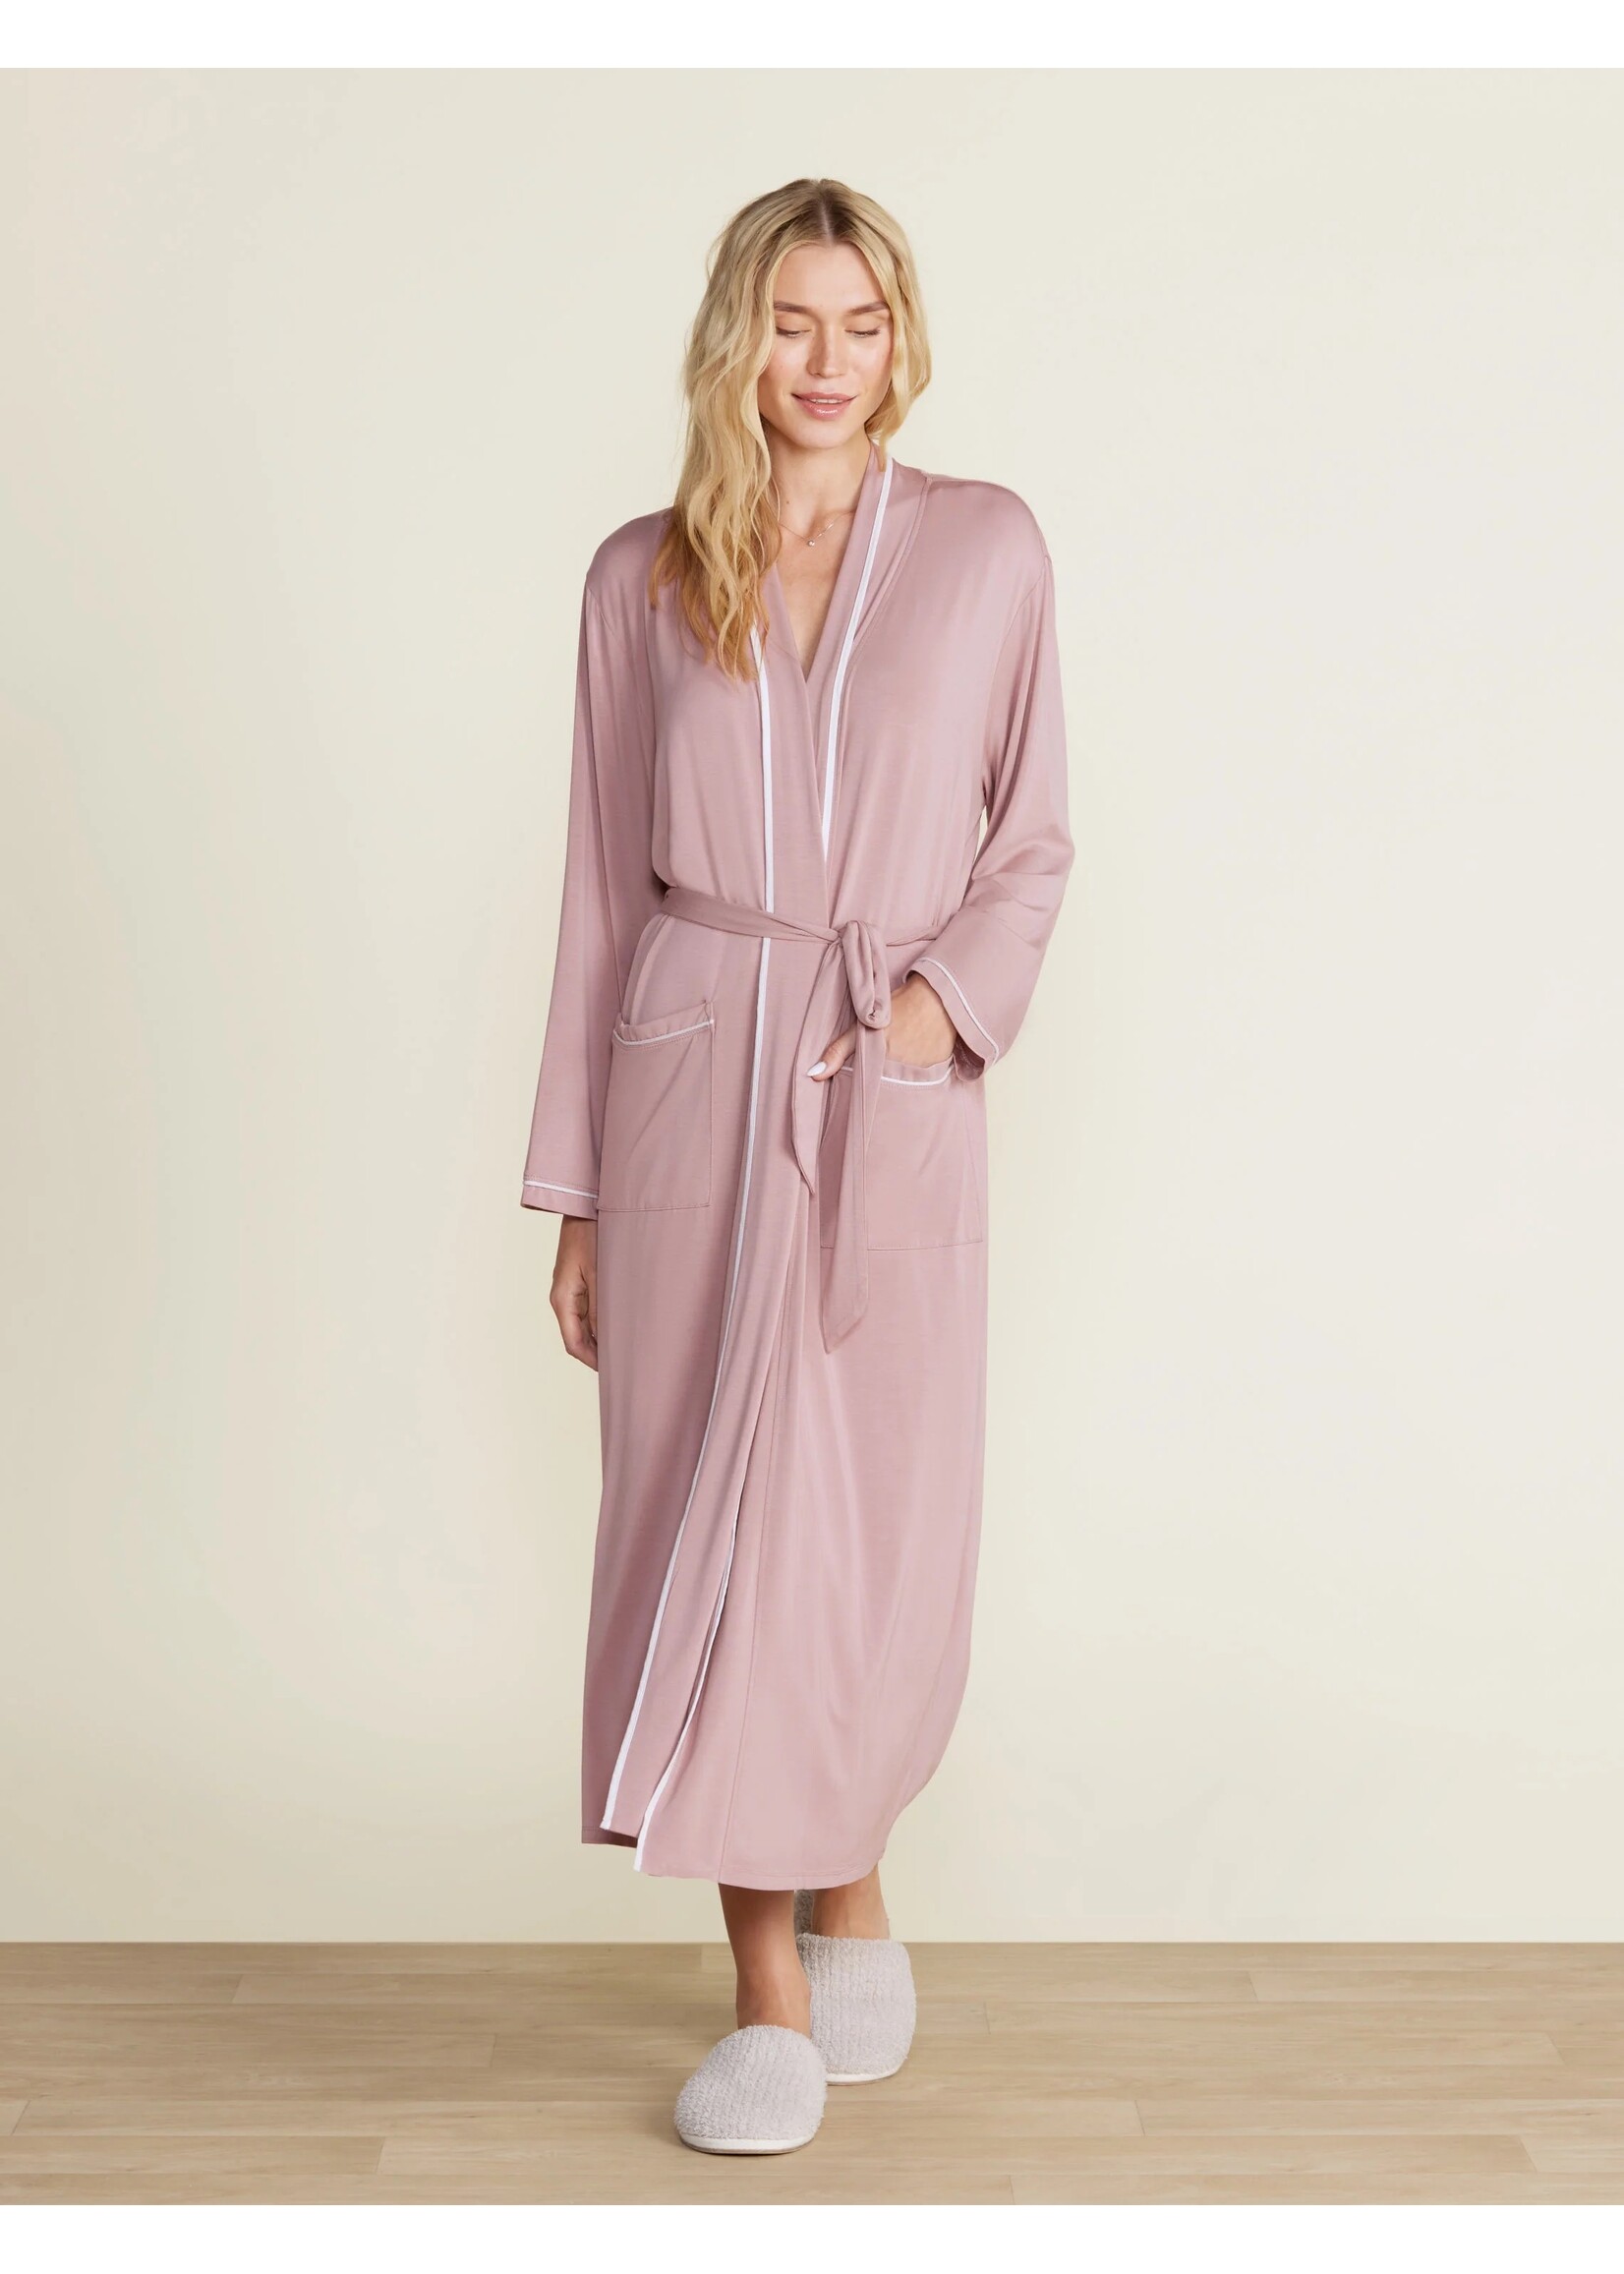 Barefoot Dreams Soft Jersey Piped Robe (available in 2 colors)